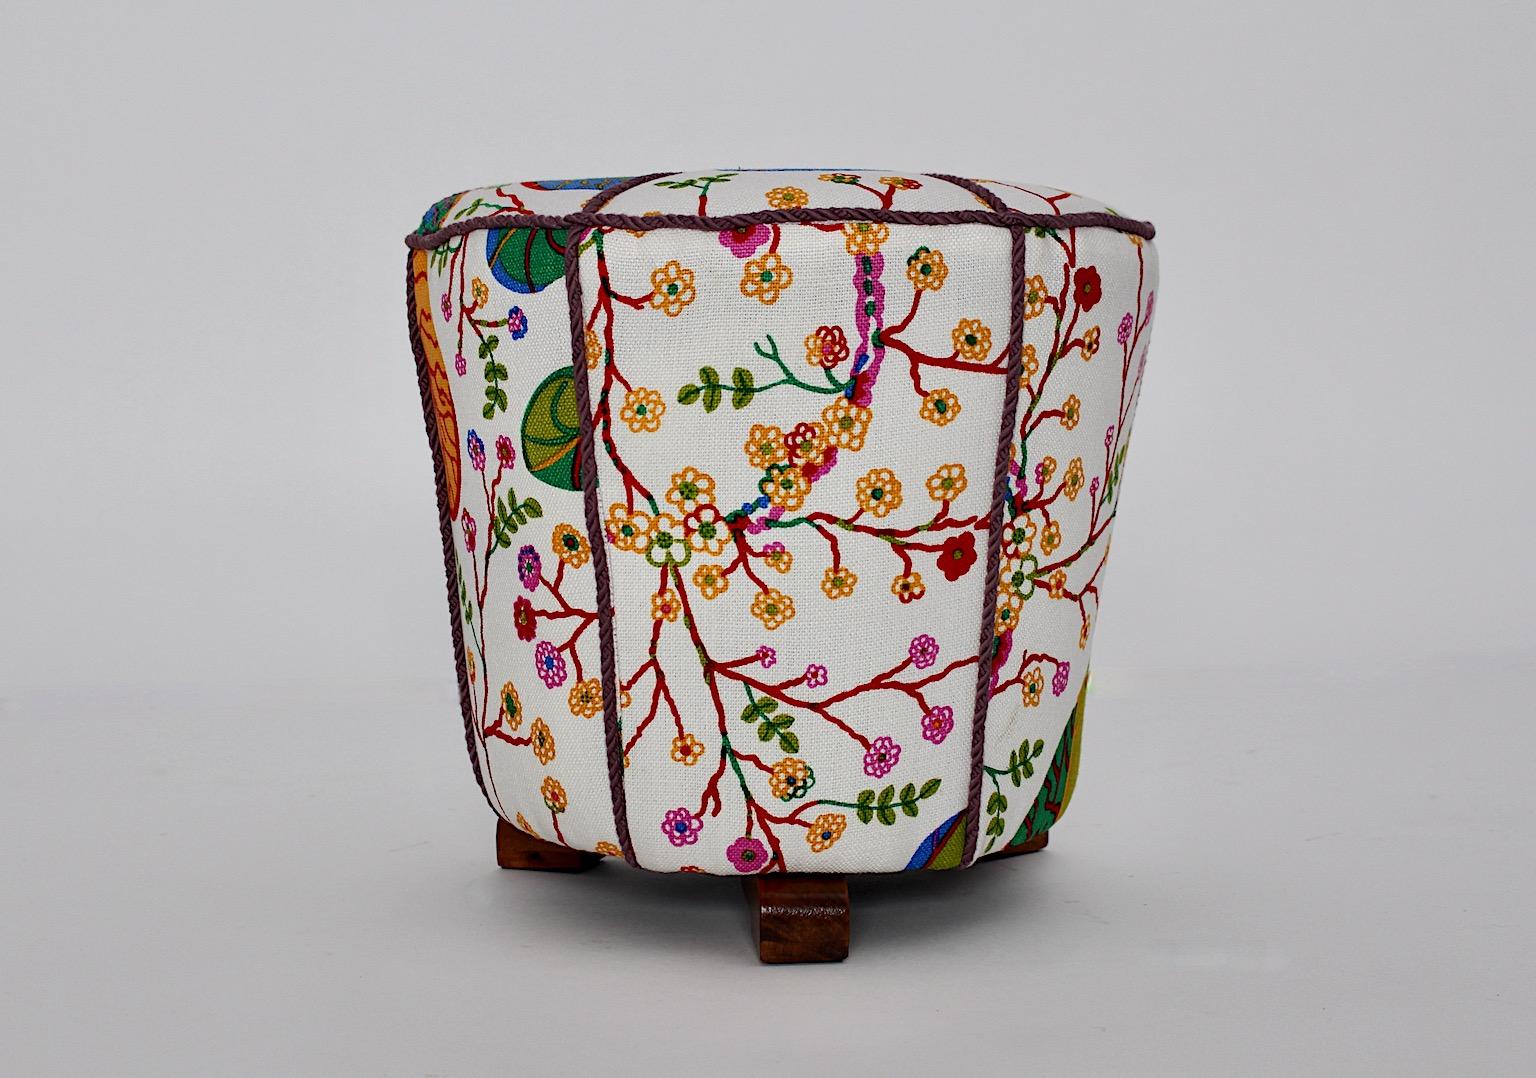 Art Deco vintage pouf or stool or ottoman with three beech wood feet designed and manufactured 1930s Austria.
An amazing stool covered with fresh and colorful textile fabric designed by Josef Frank and manufactured by Svenskt Tenn. Decorated with